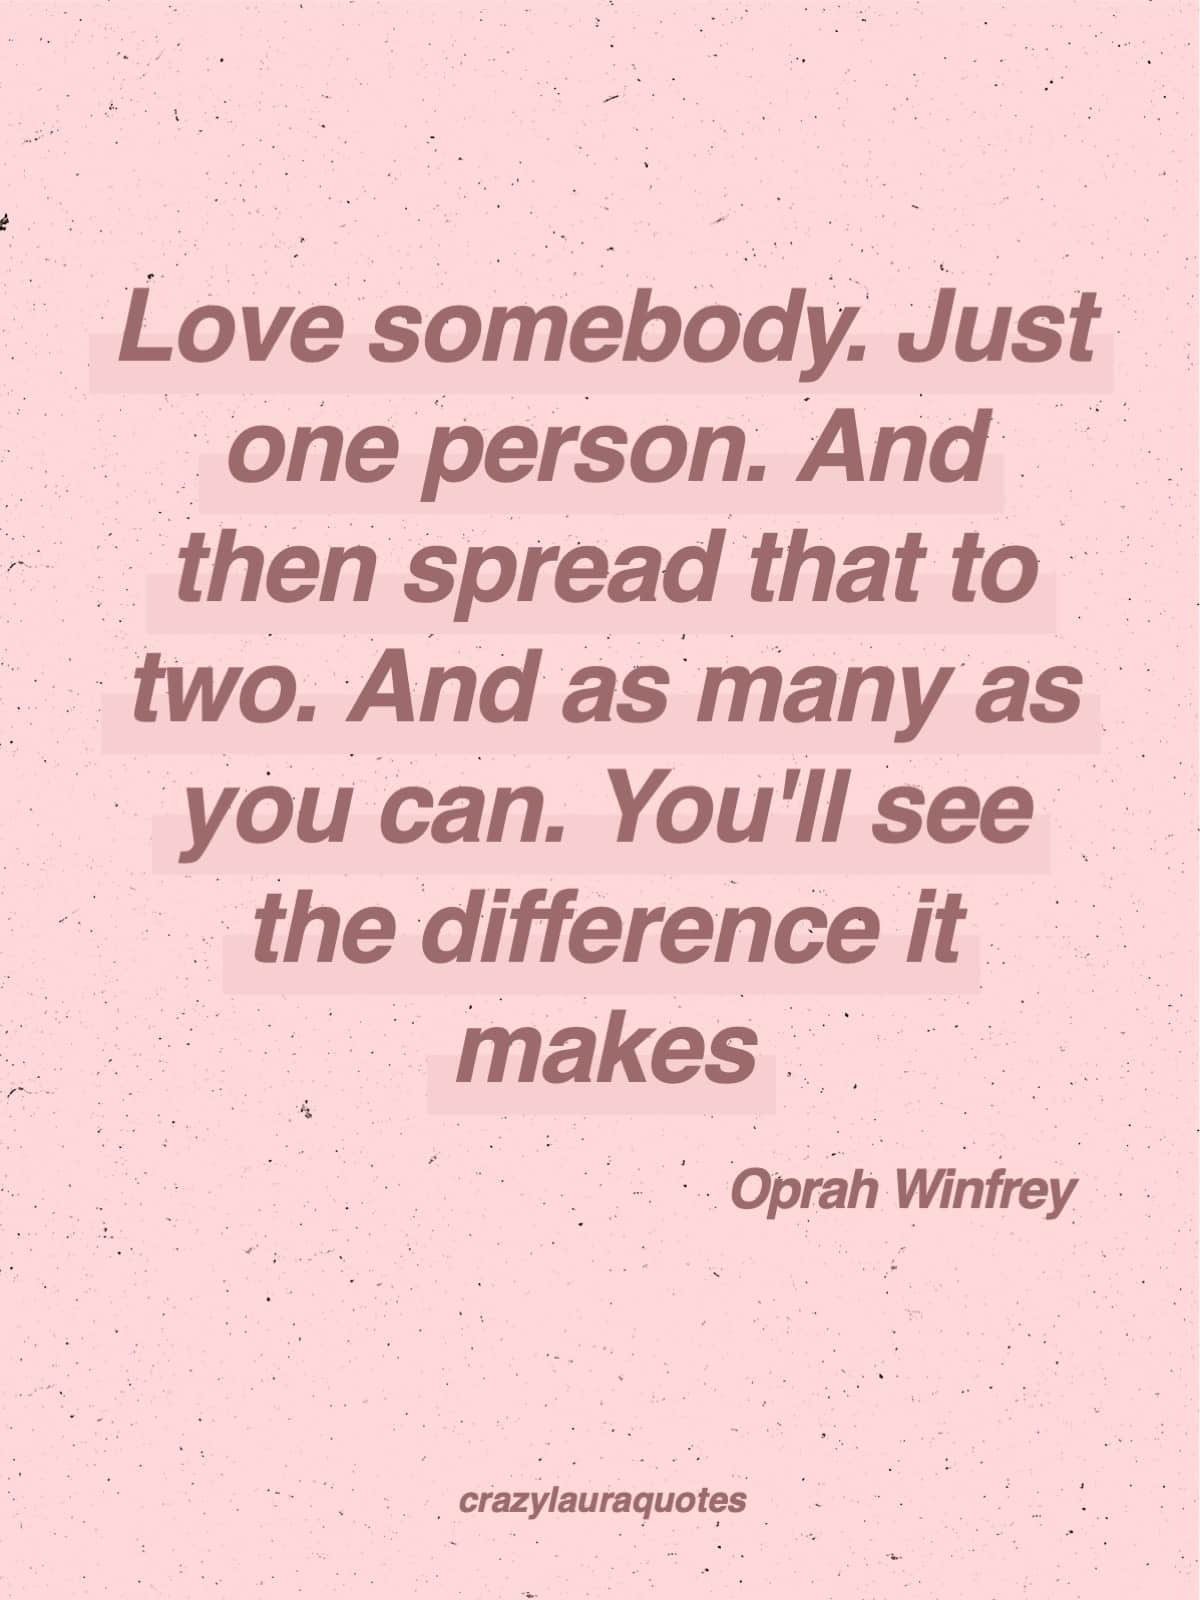 love makes a difference oprah winfrey quote